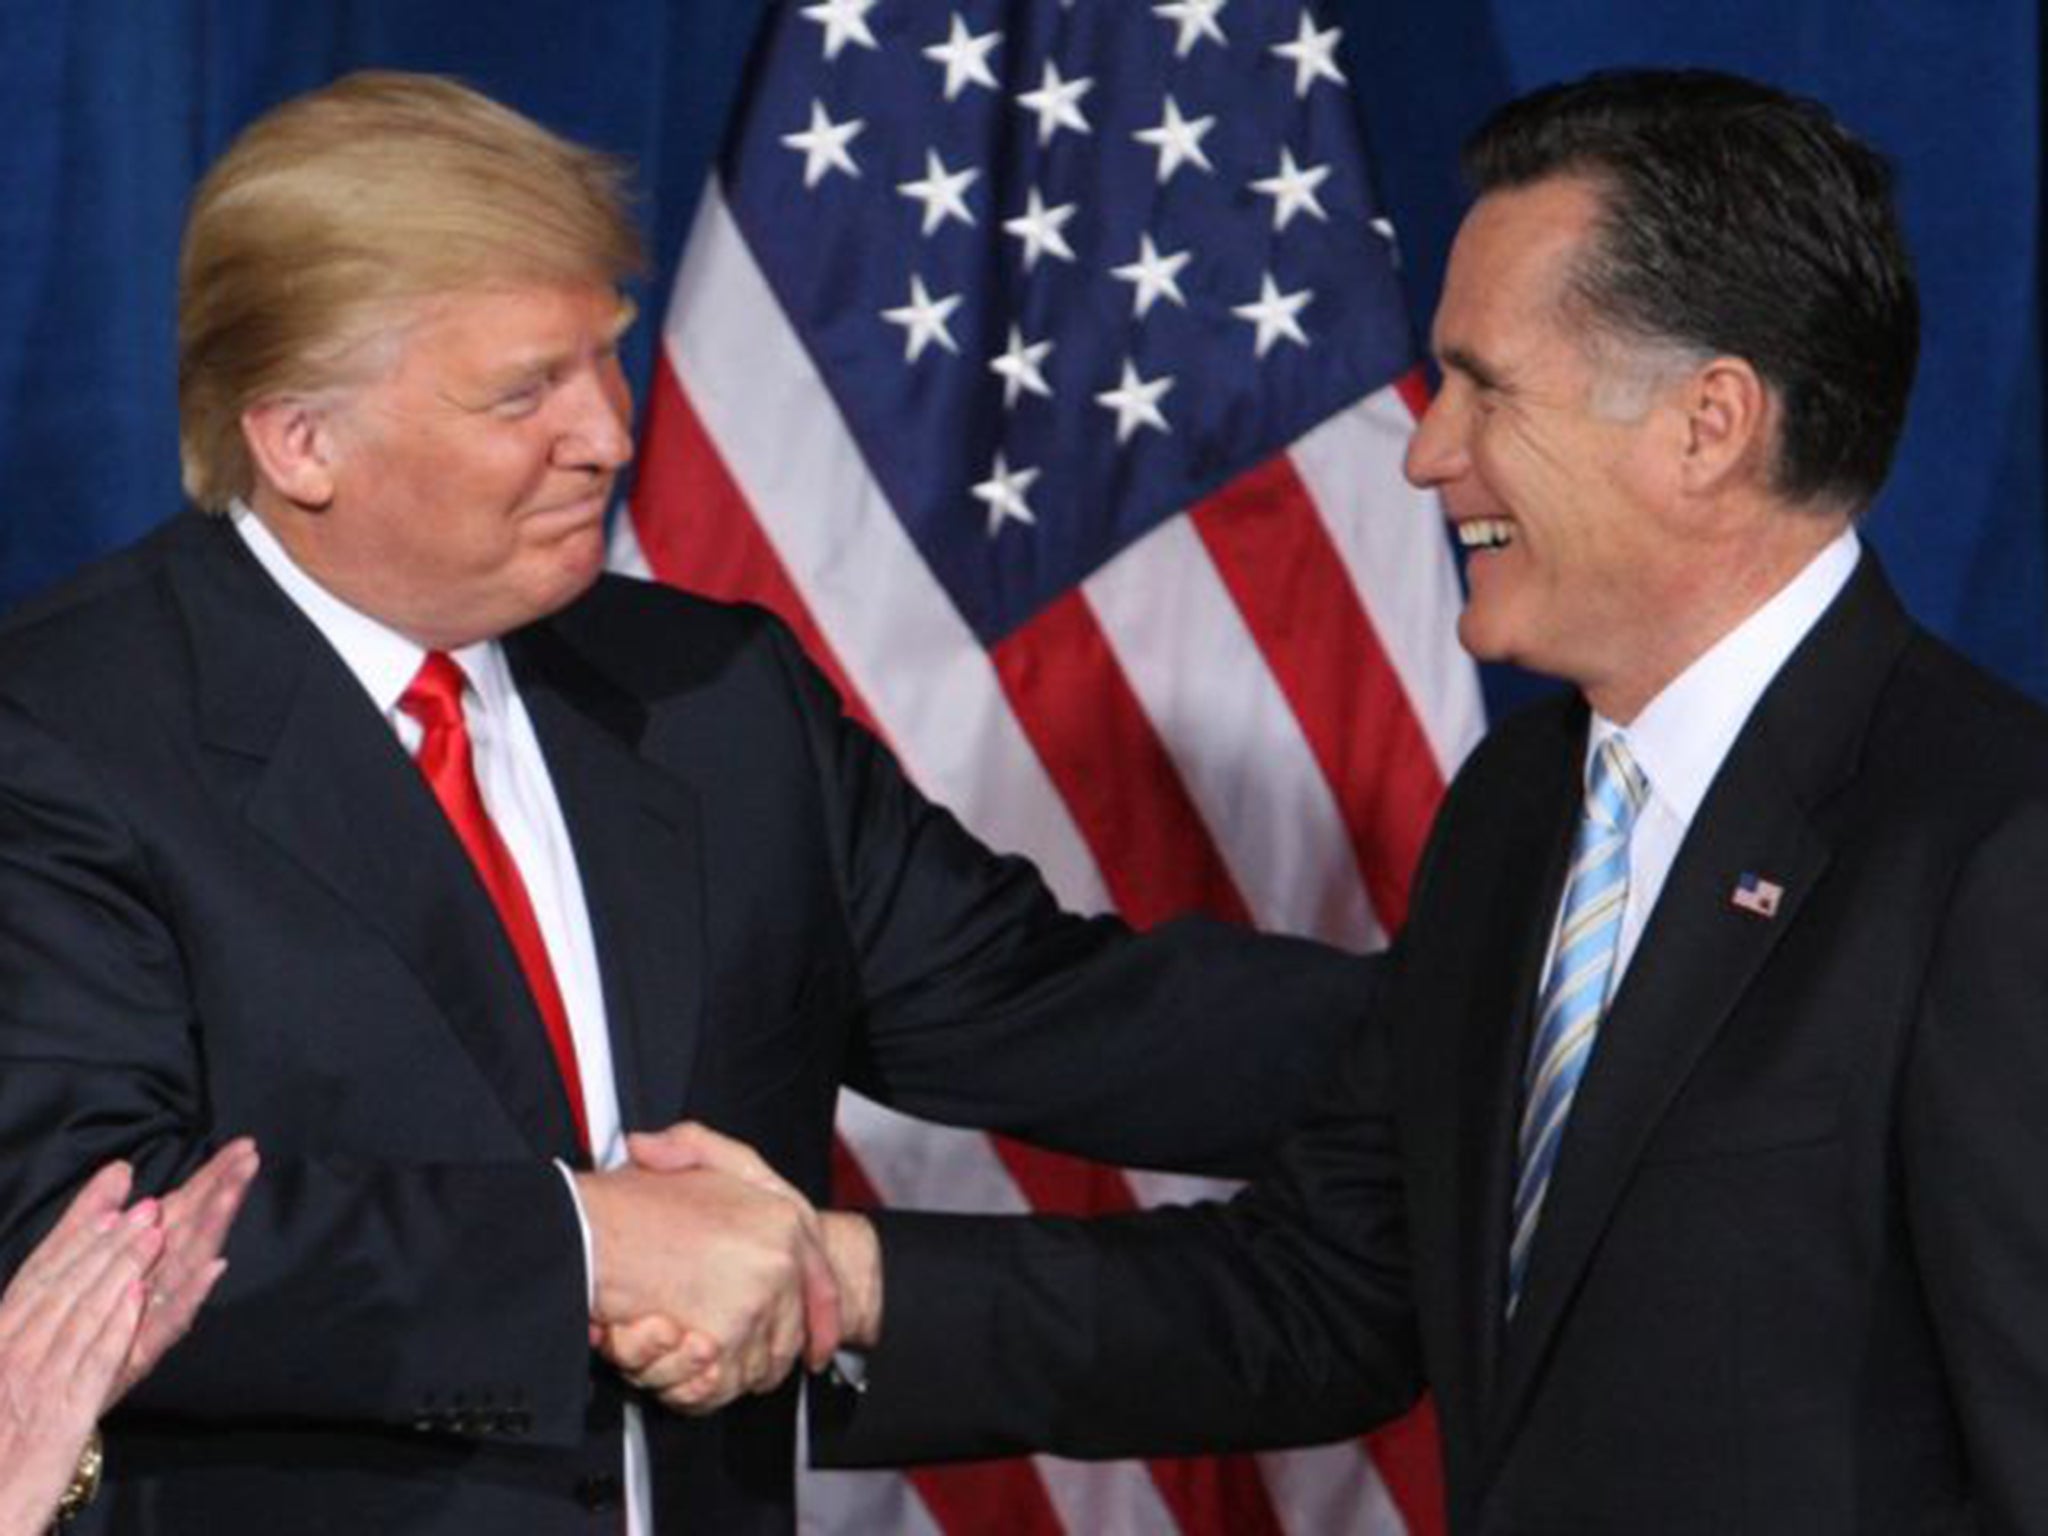 Mr Romney was briefly considered for a cabinet position in the Trump administration